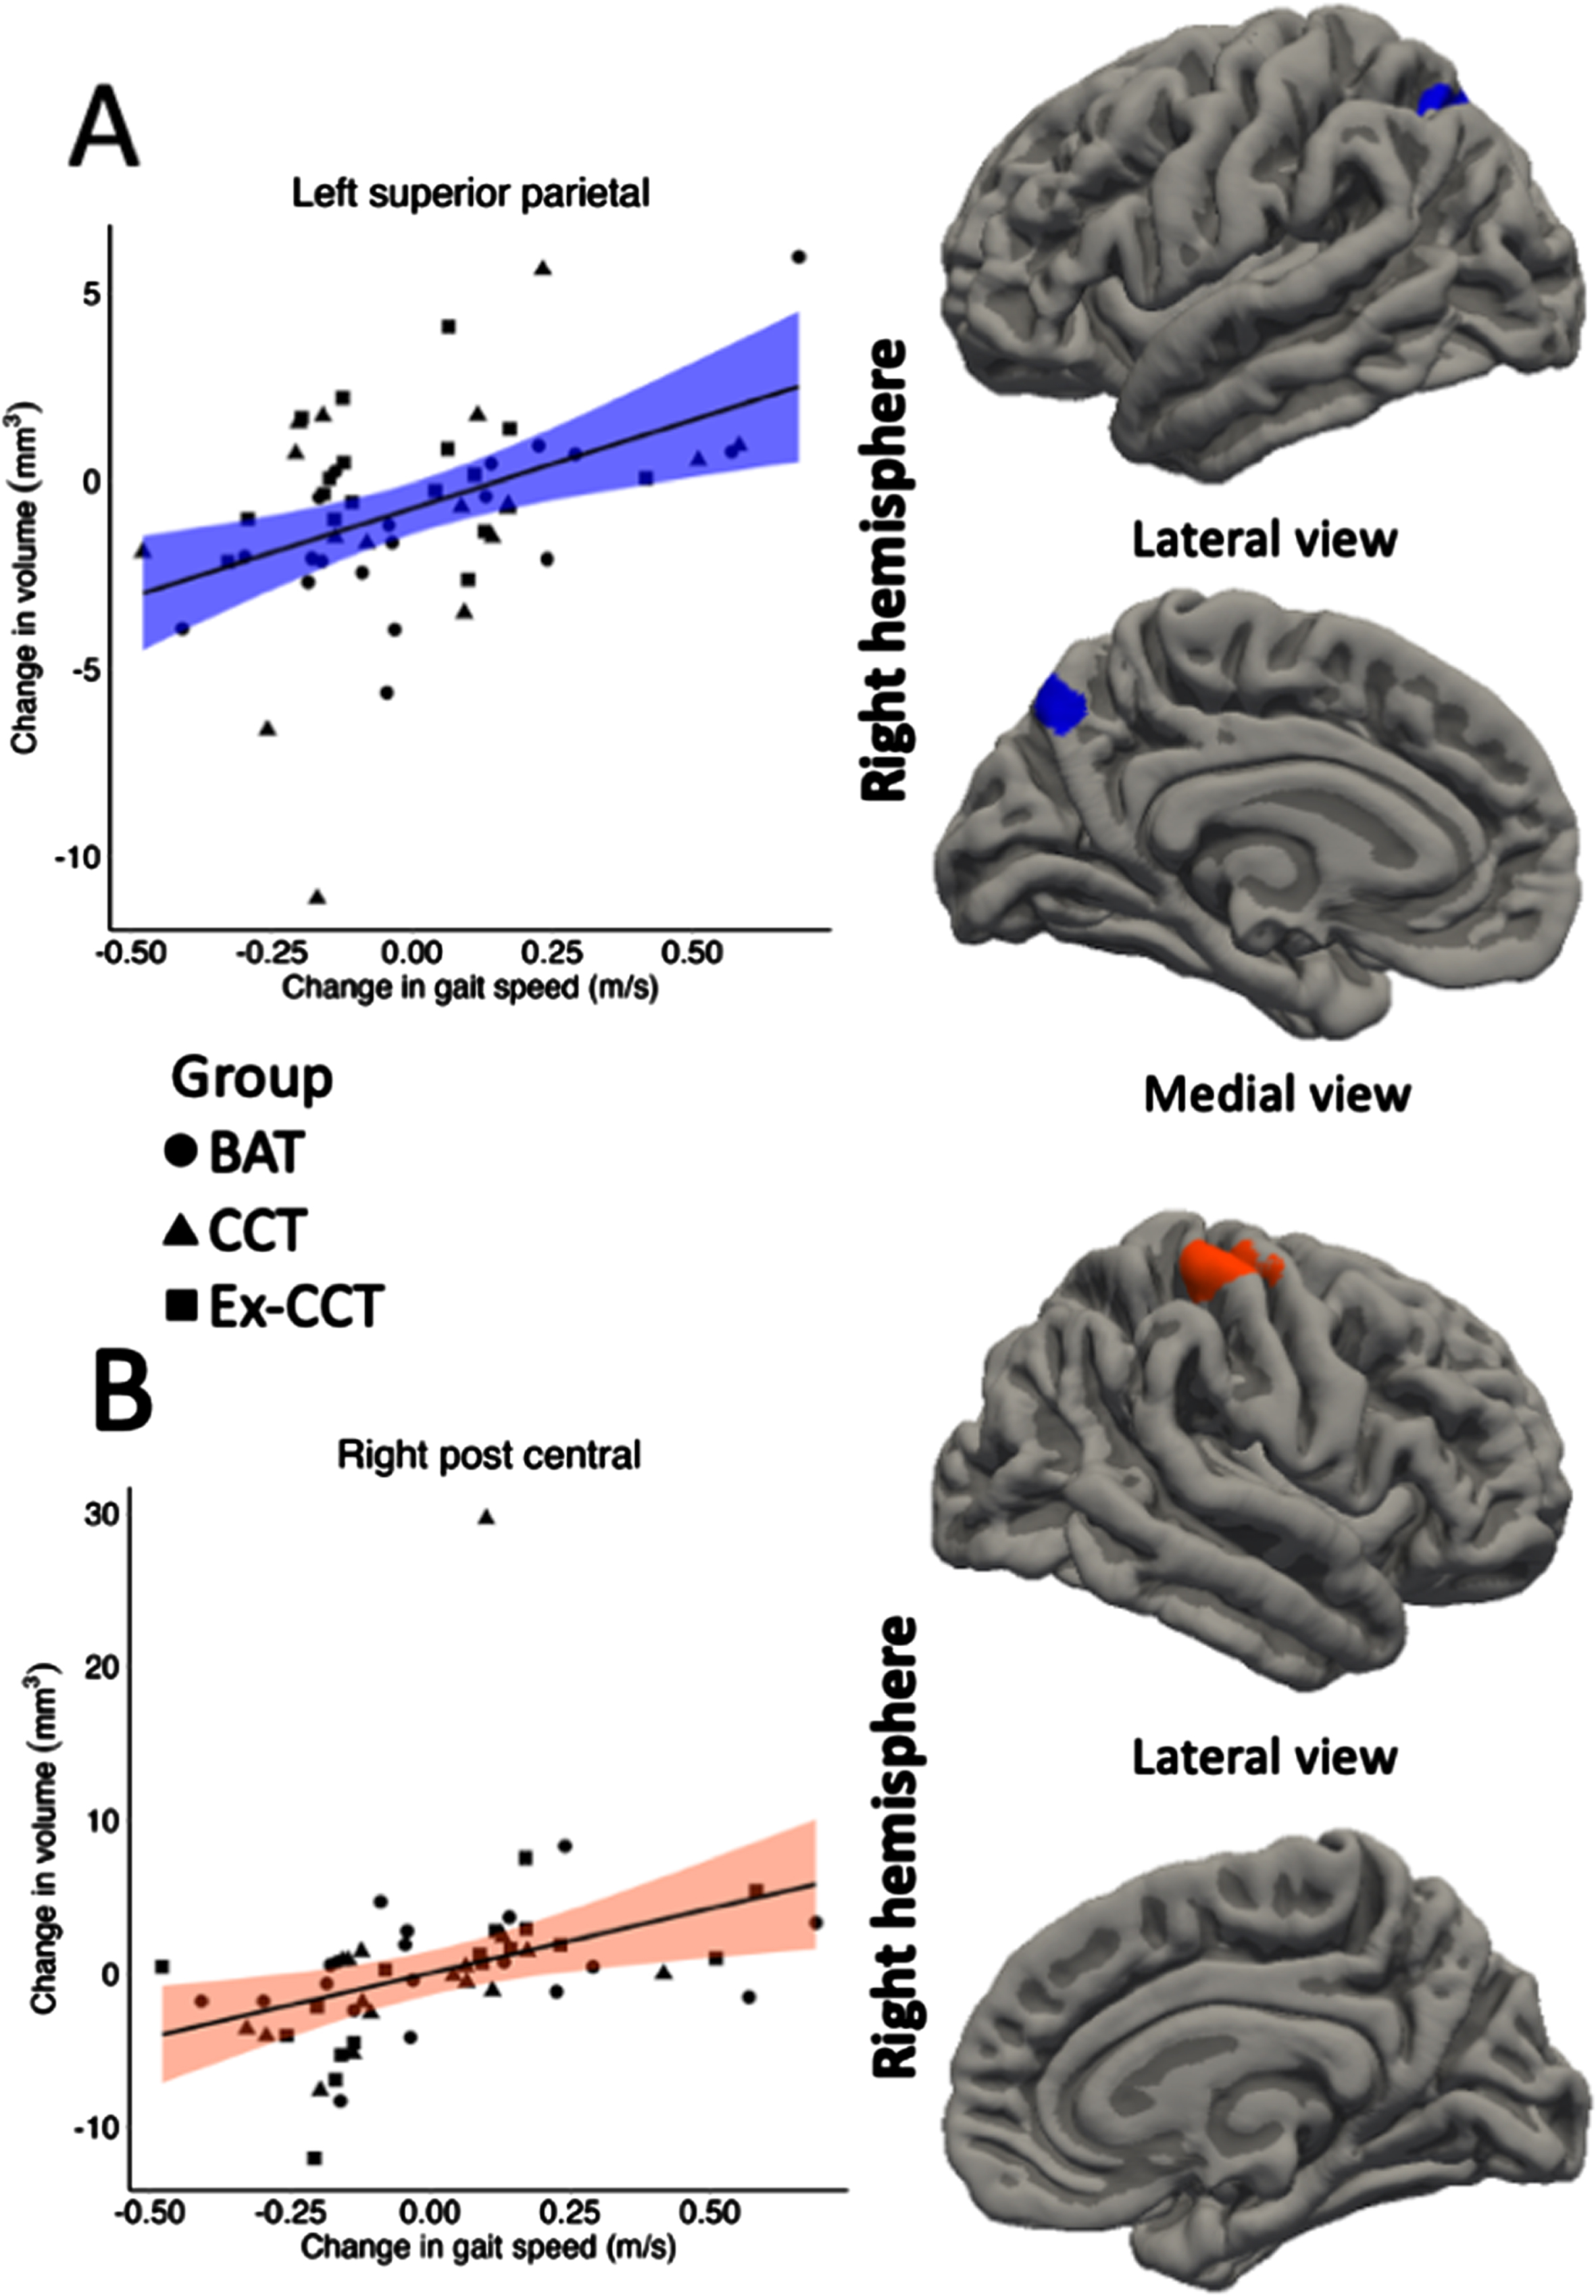 Significant correlation (α< 0.05) between: A) change in left superior parietal volume; and B) change in right post central volume with change in gait speed, controlling for age, sex, and MoCA.